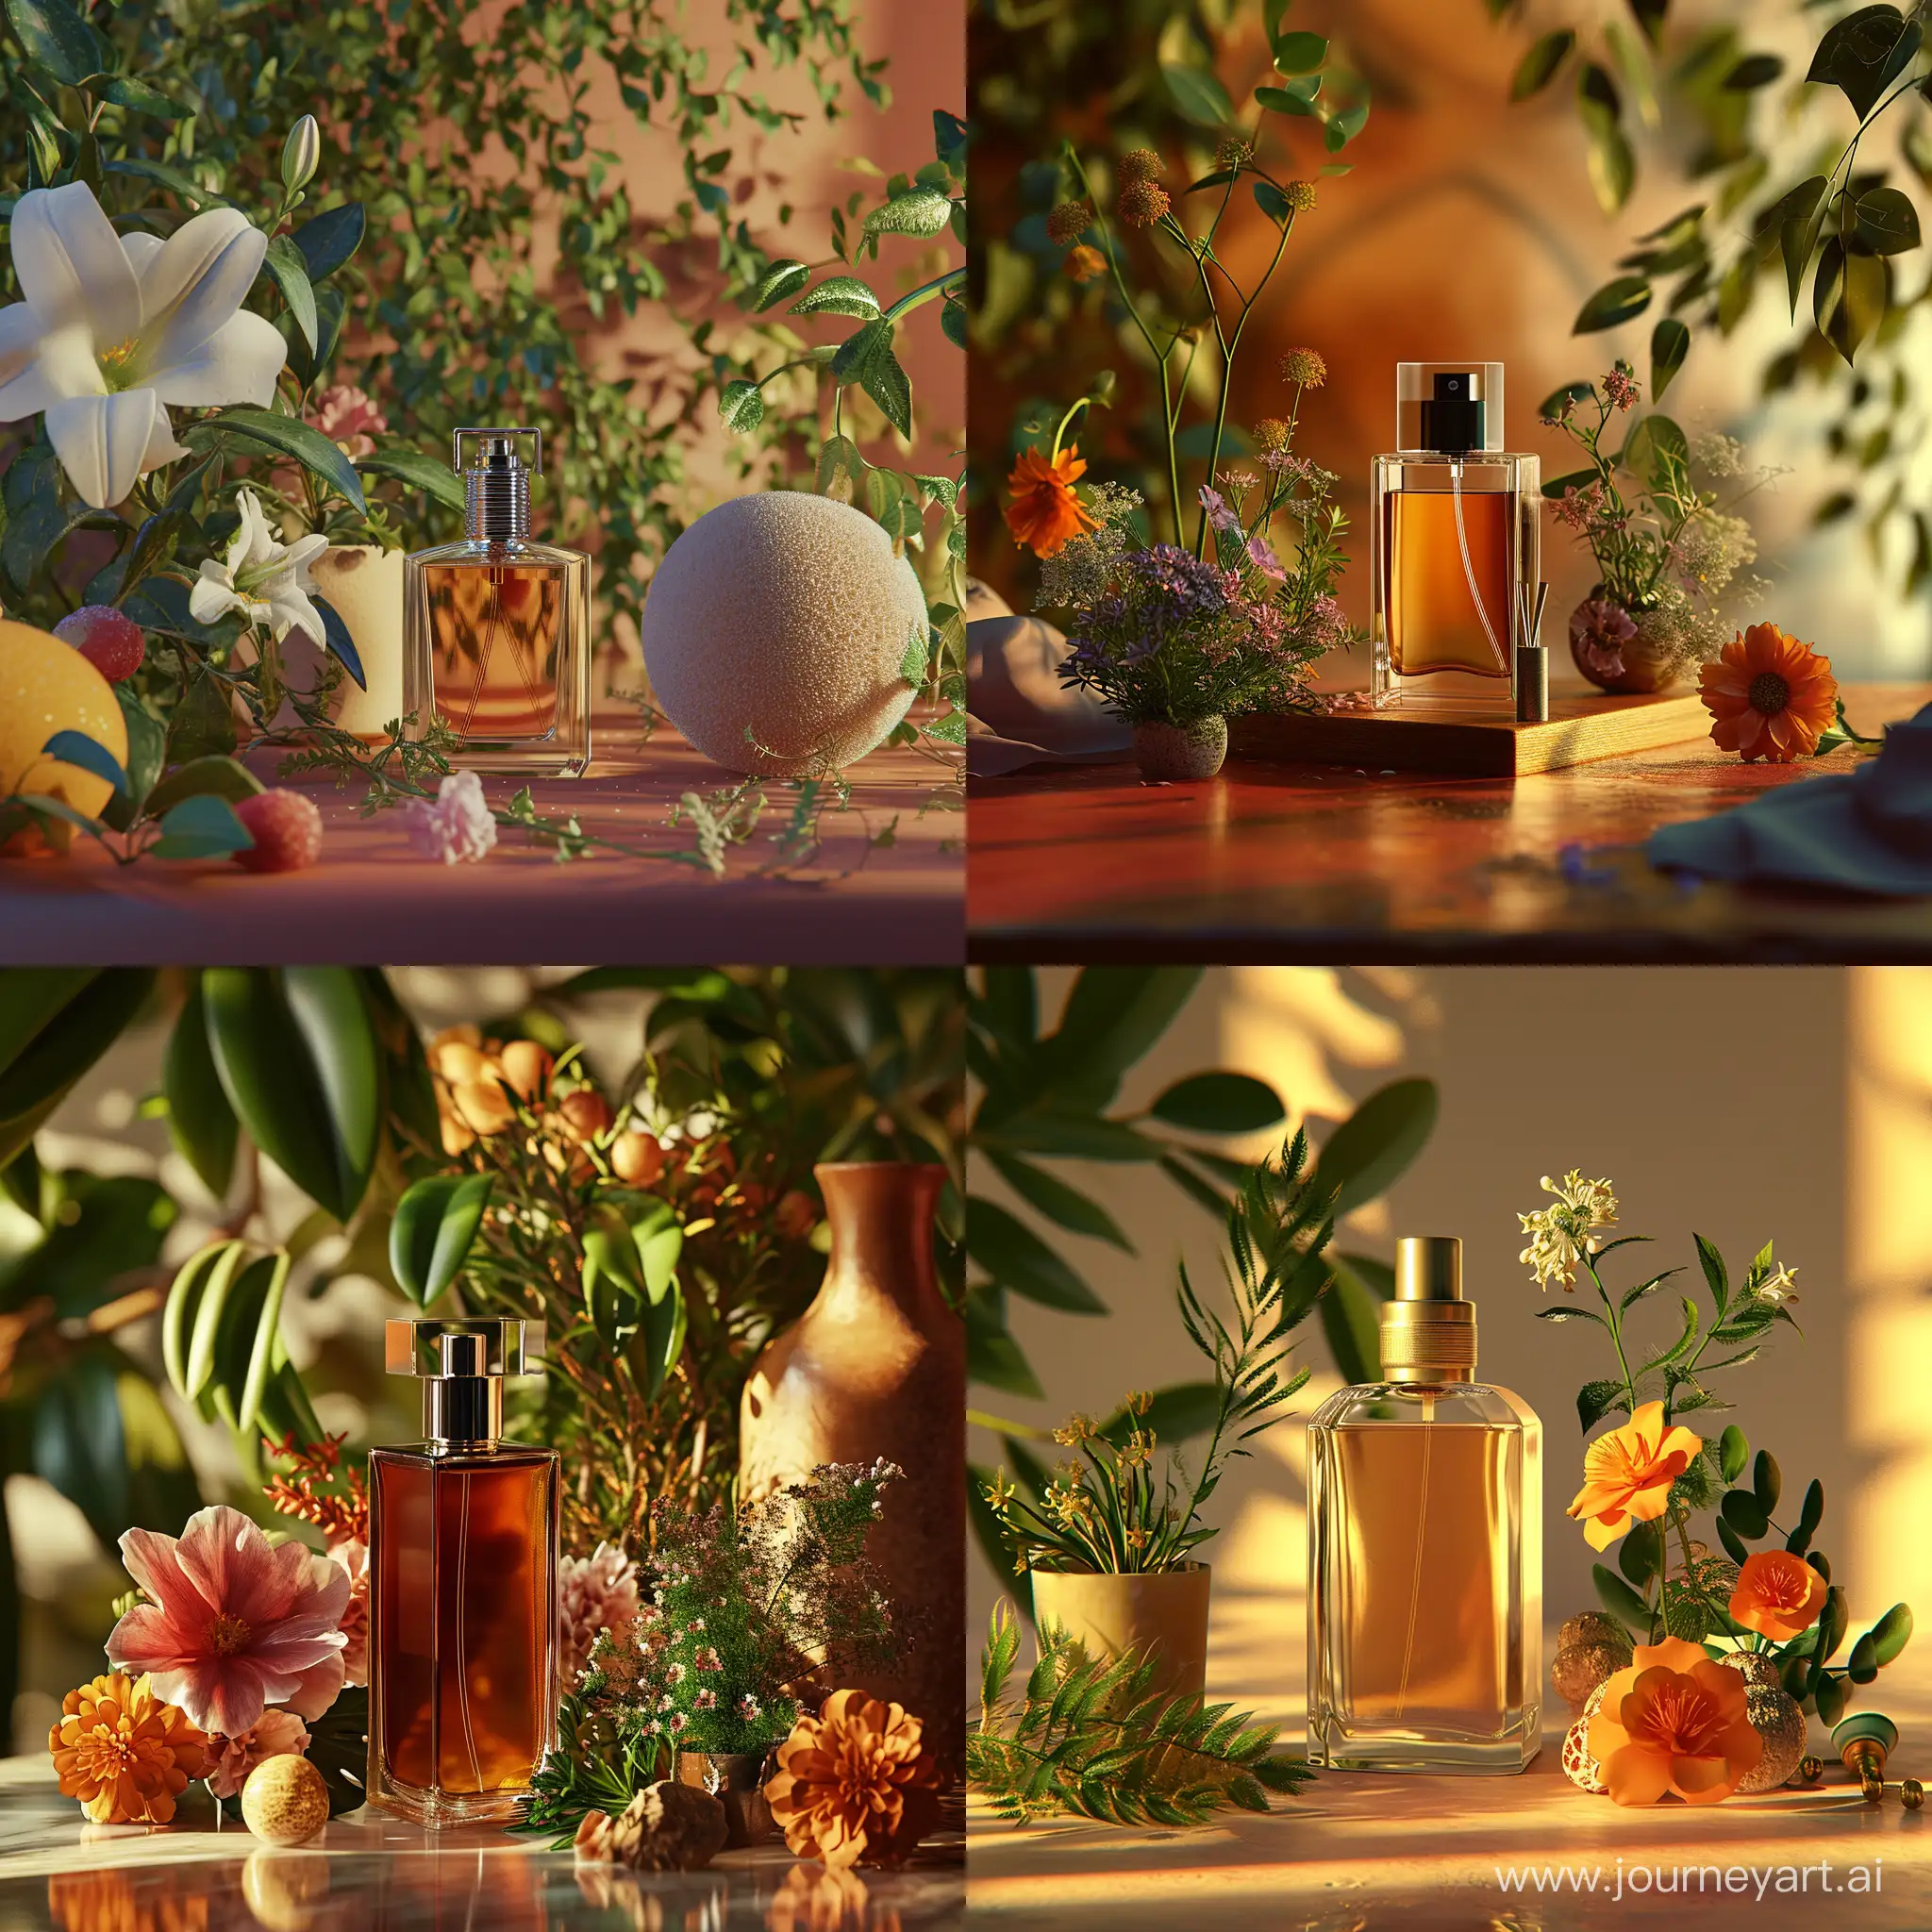 Elegant-Perfume-and-Floral-Arrangement-on-Table-Octain-Render-Inspired-by-Louis-Hersent